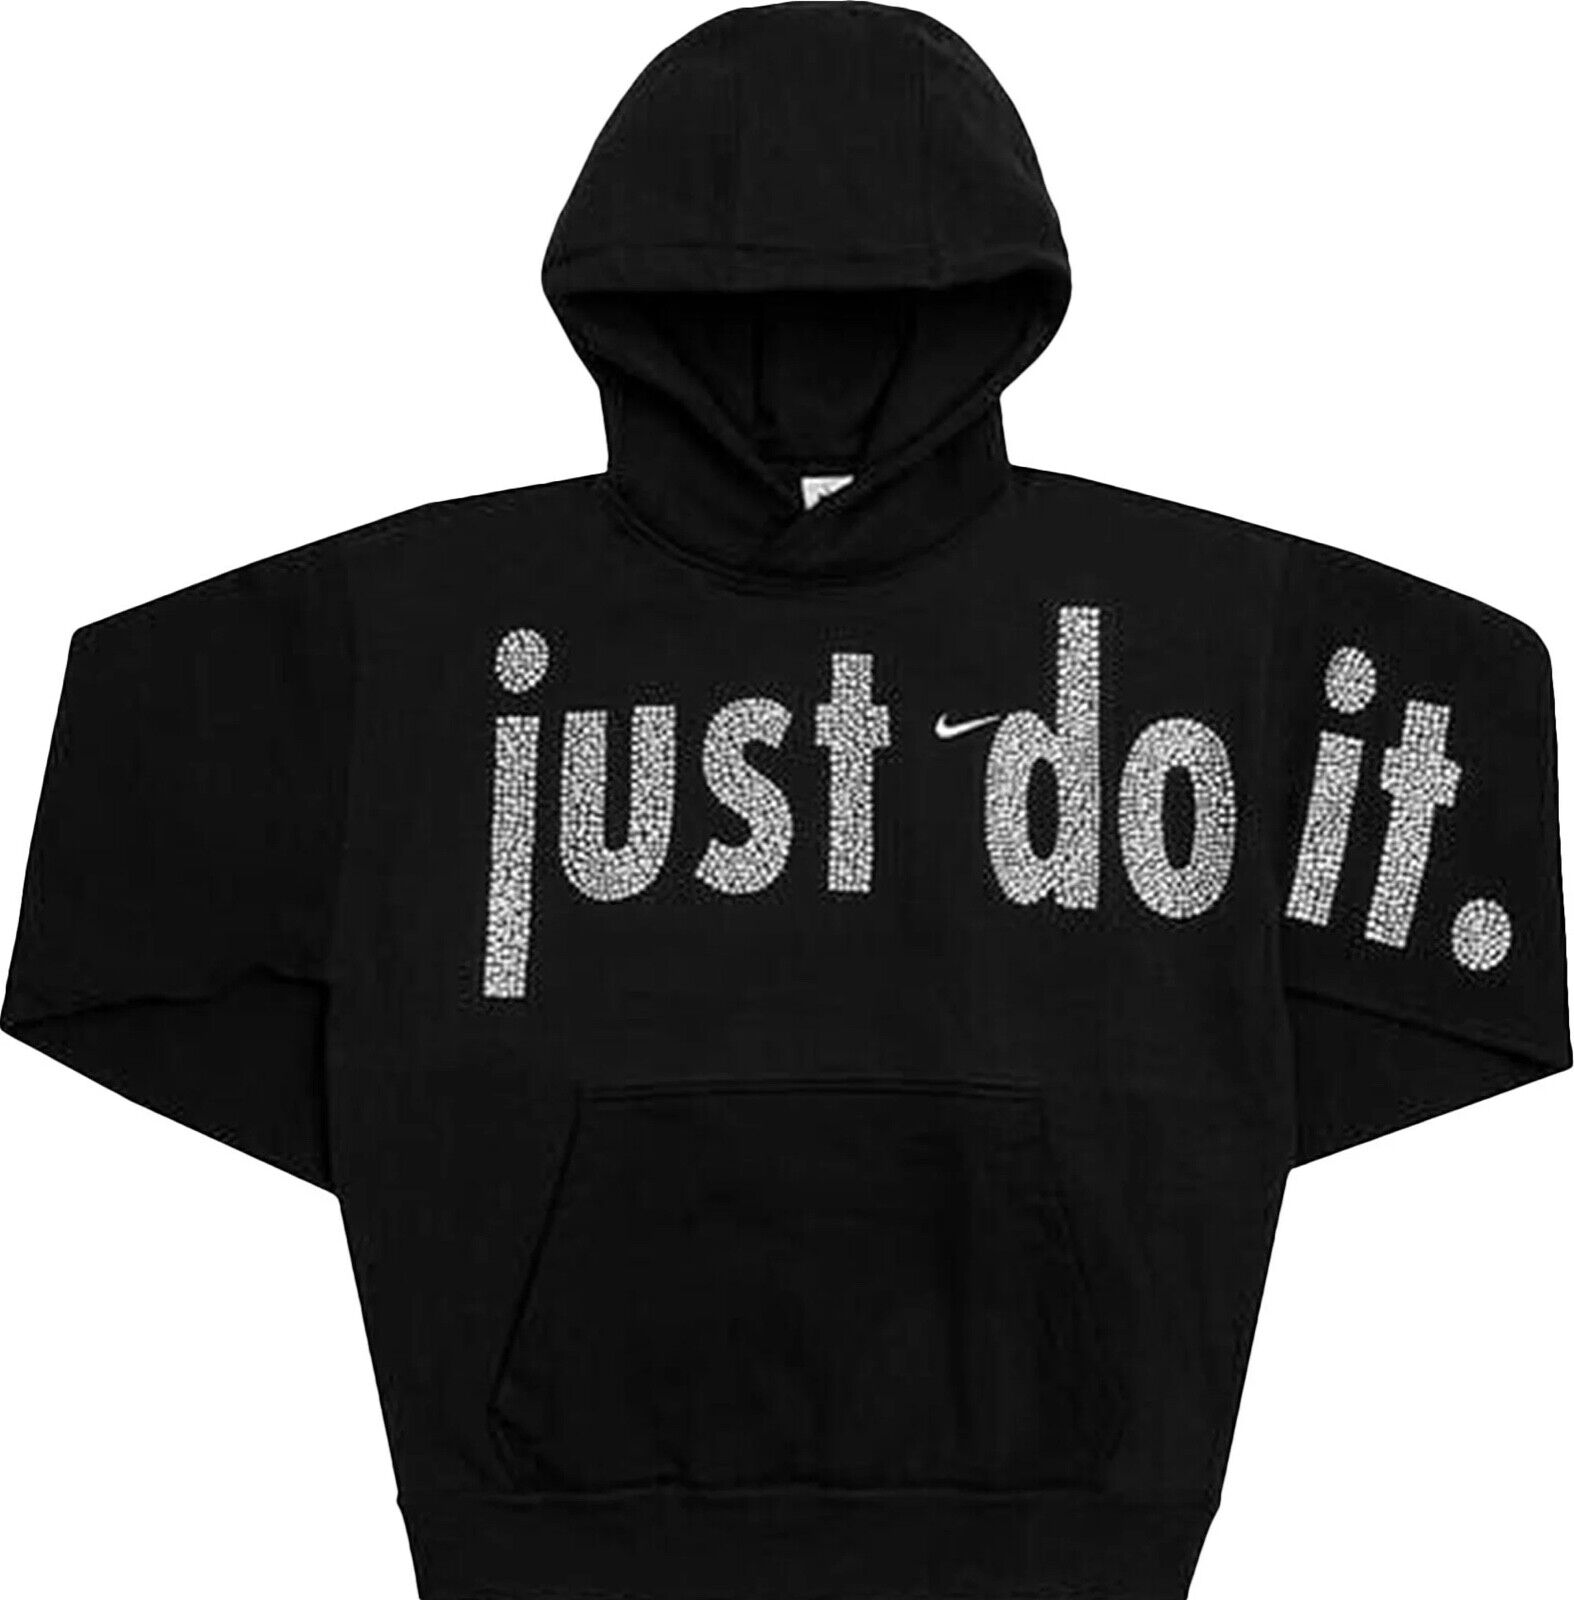 Experience Luxury And Comfort With A Just Do It Swarovski Hoodie